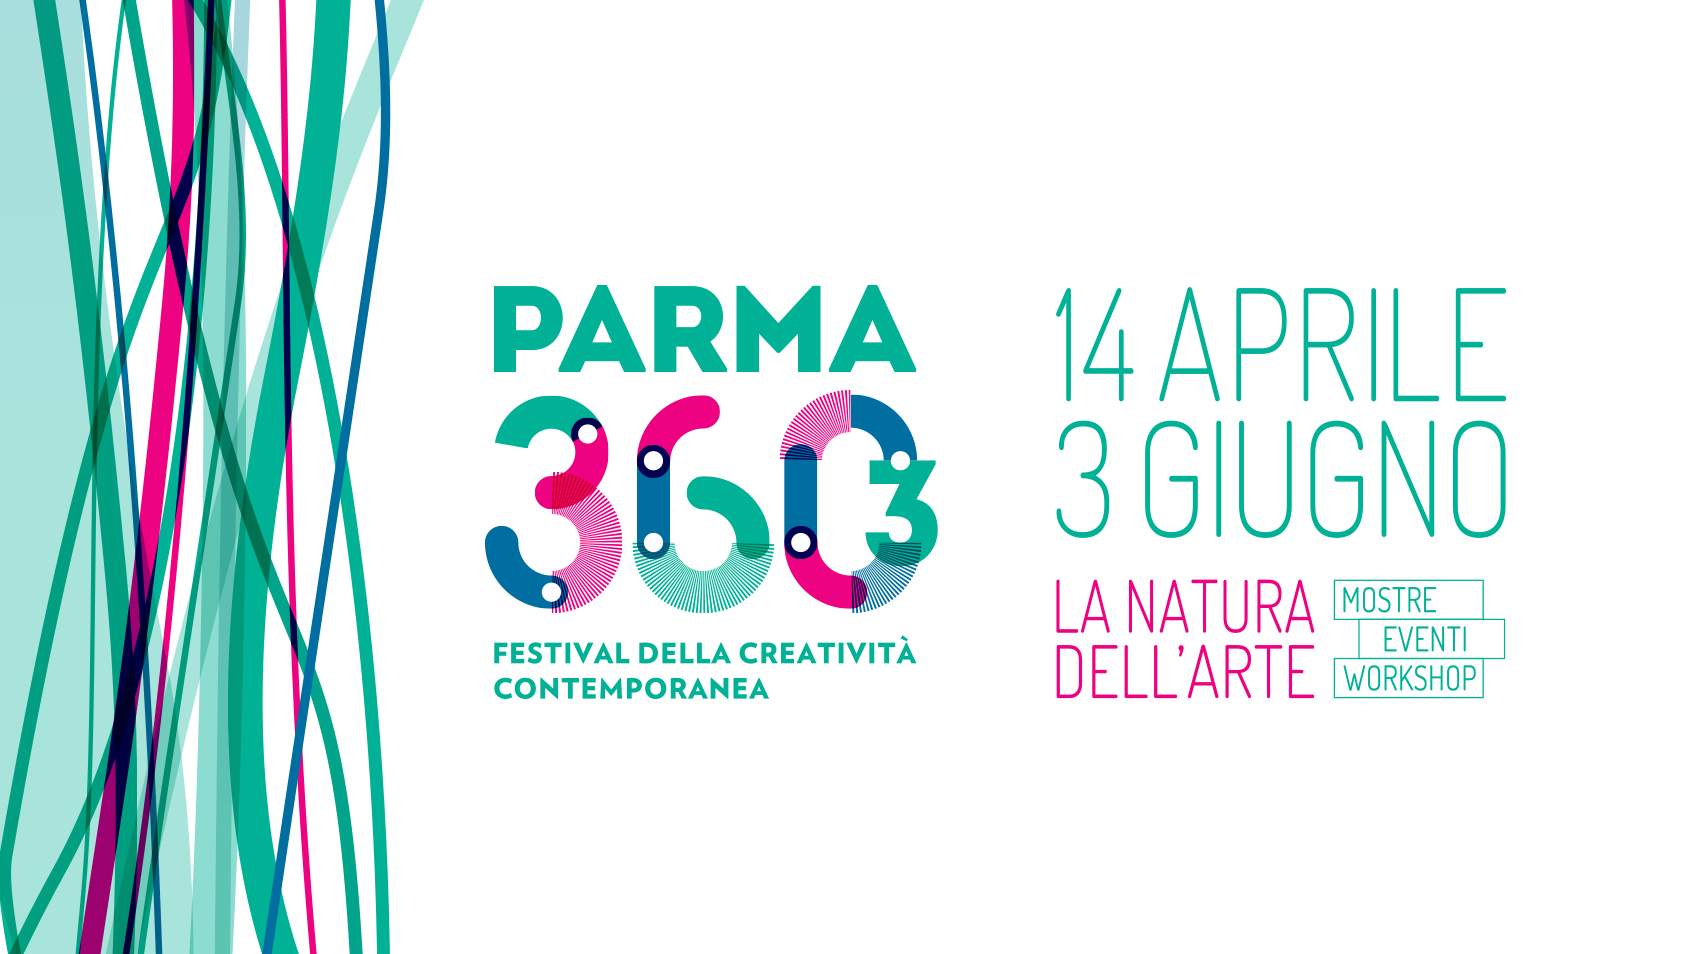 PARMA 360: the third edition from April 14 to June 3, 2018